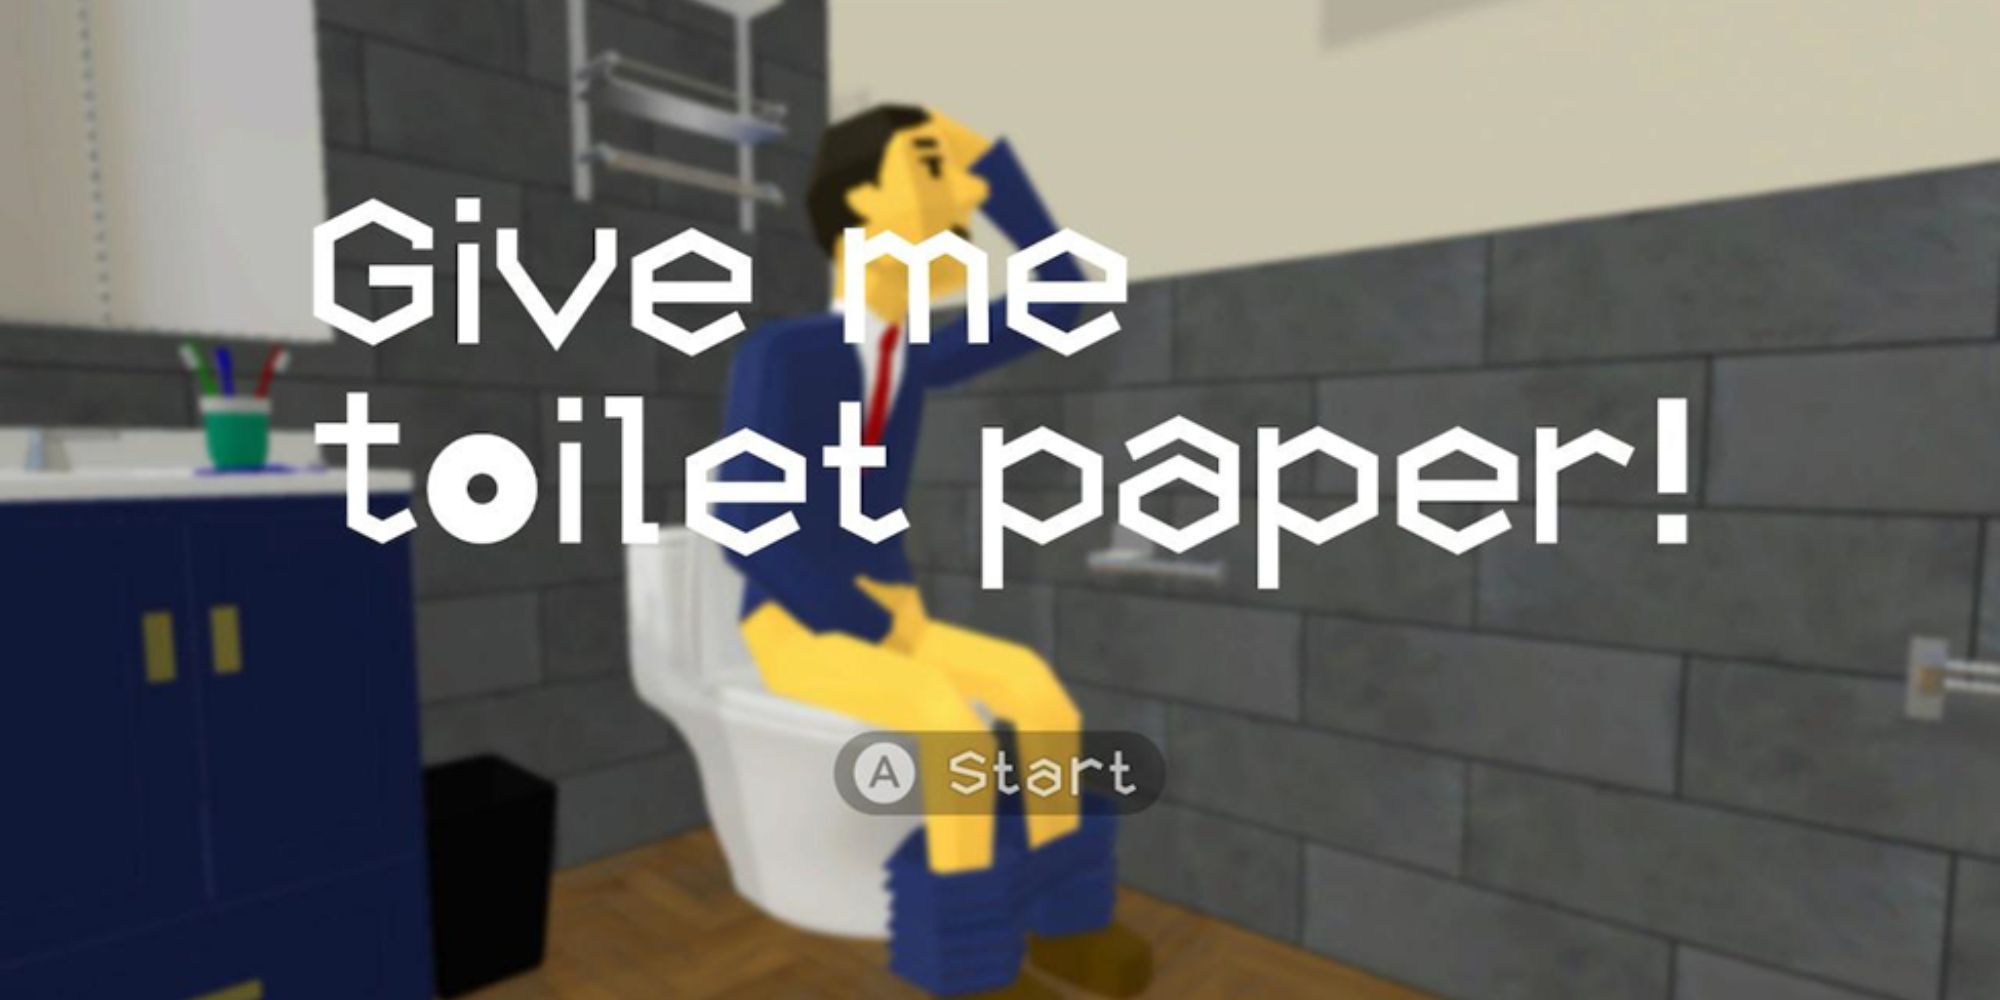 The title screen for the game Give Me Toilet Paper! showing a man sitting on a toilet